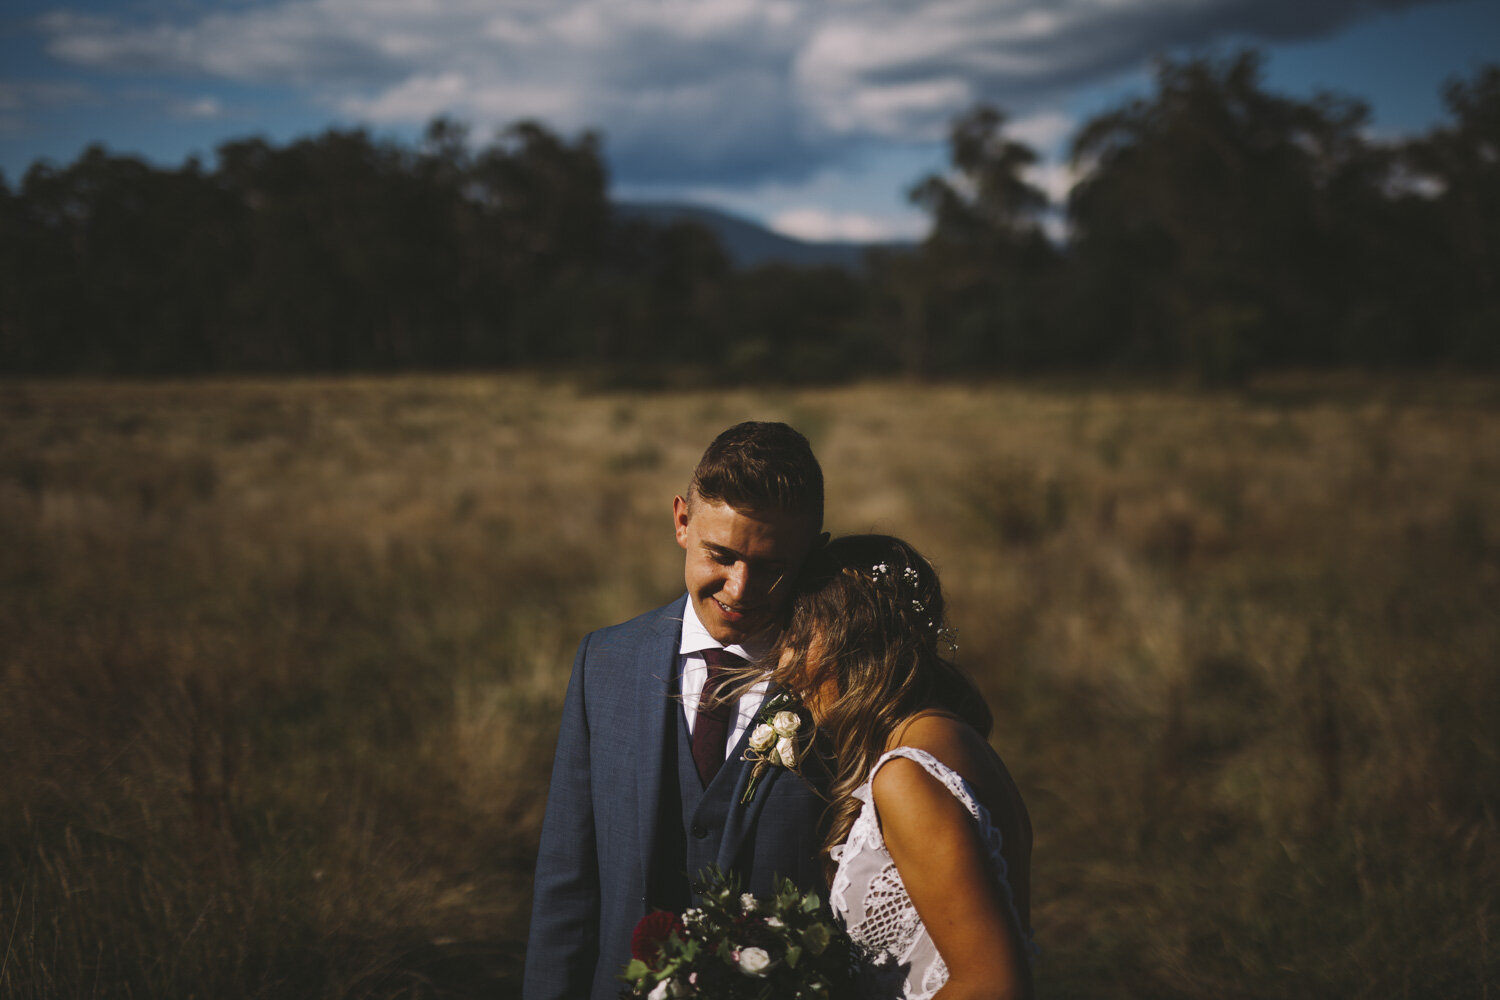 Rustic wedding photography packages